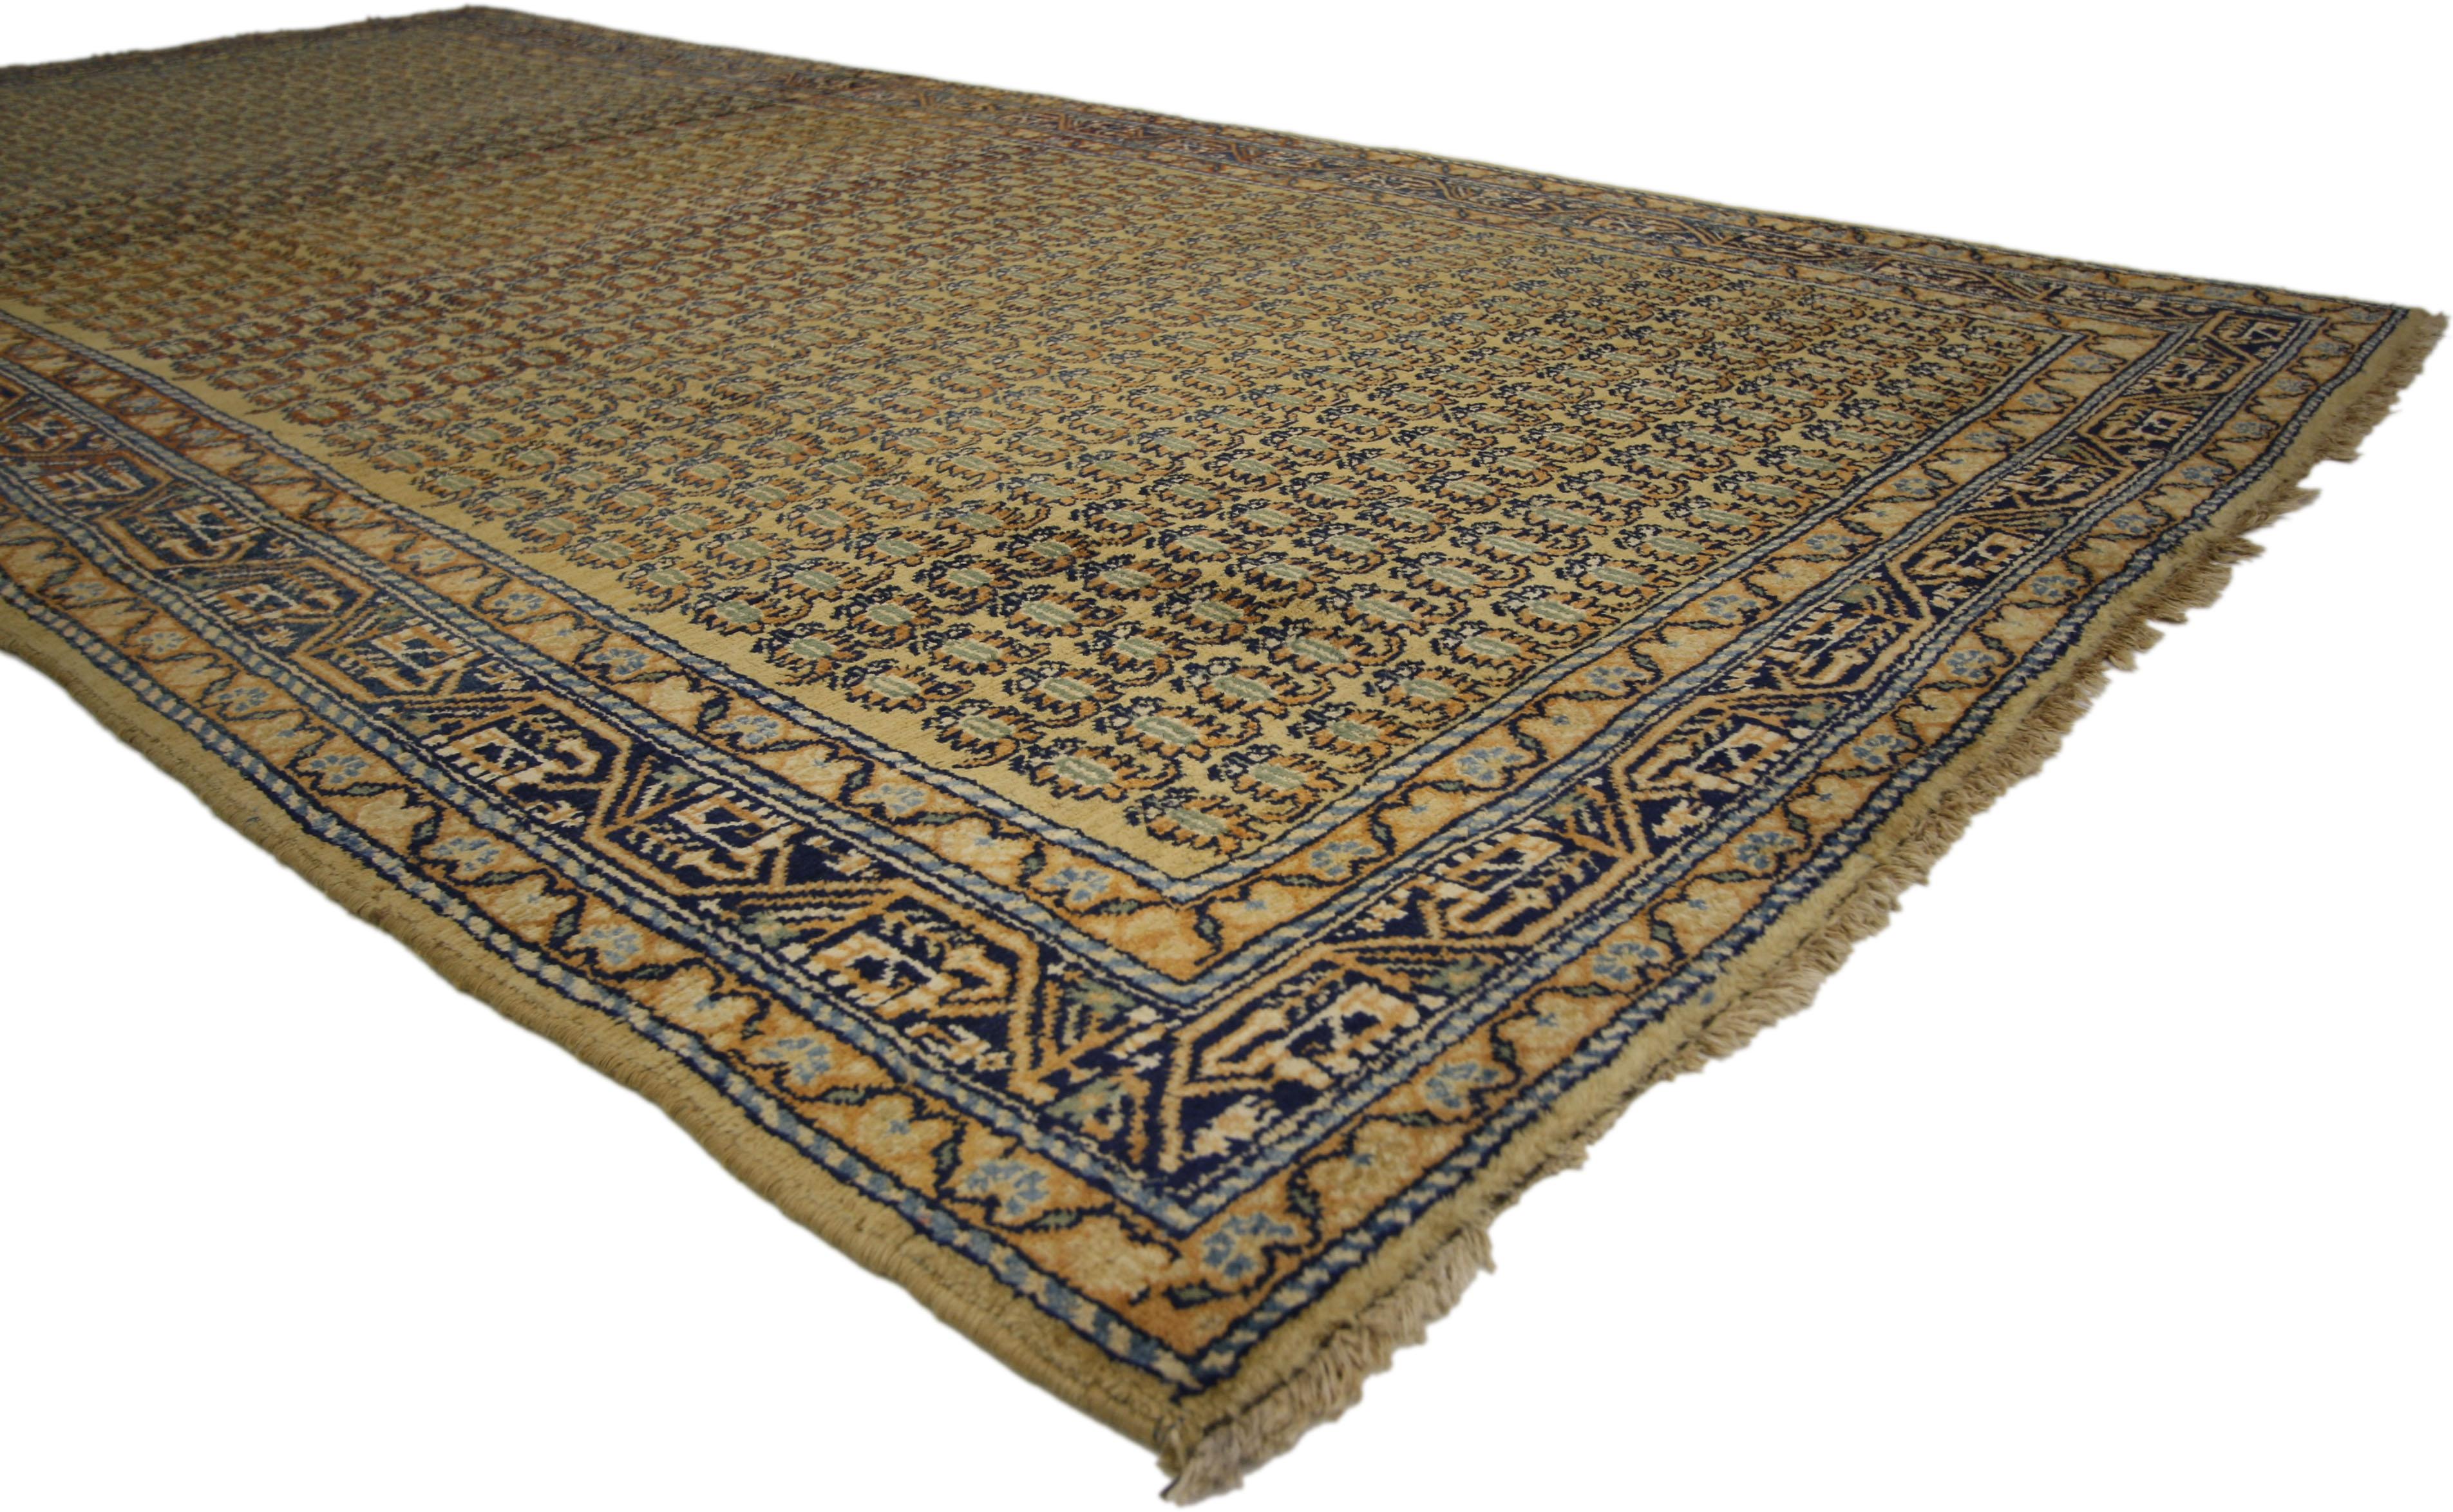 72614 Antique Persian Saraband Runner with Mir Boteh Design, Wide Hallway Runner 04'09 x 09'09. The hand-knotted wool antique Persian Saraband rug runner features a symmetrical columns of stylized Mir boteh motifs. The boteh resembles sprouting seed